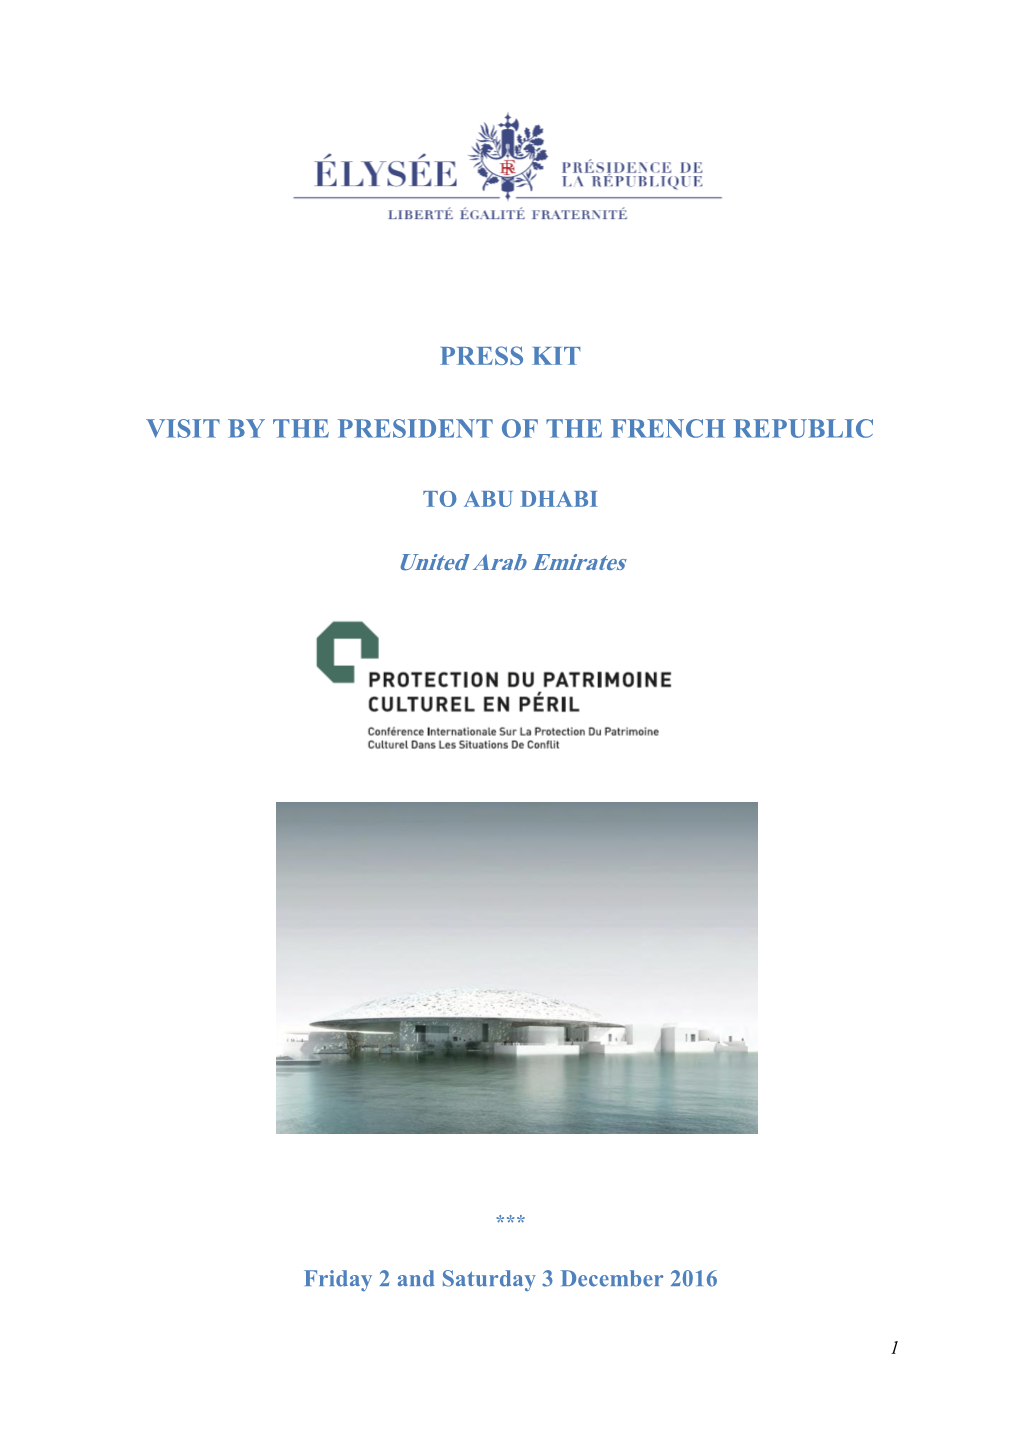 Press Kit Visit by the President of the French